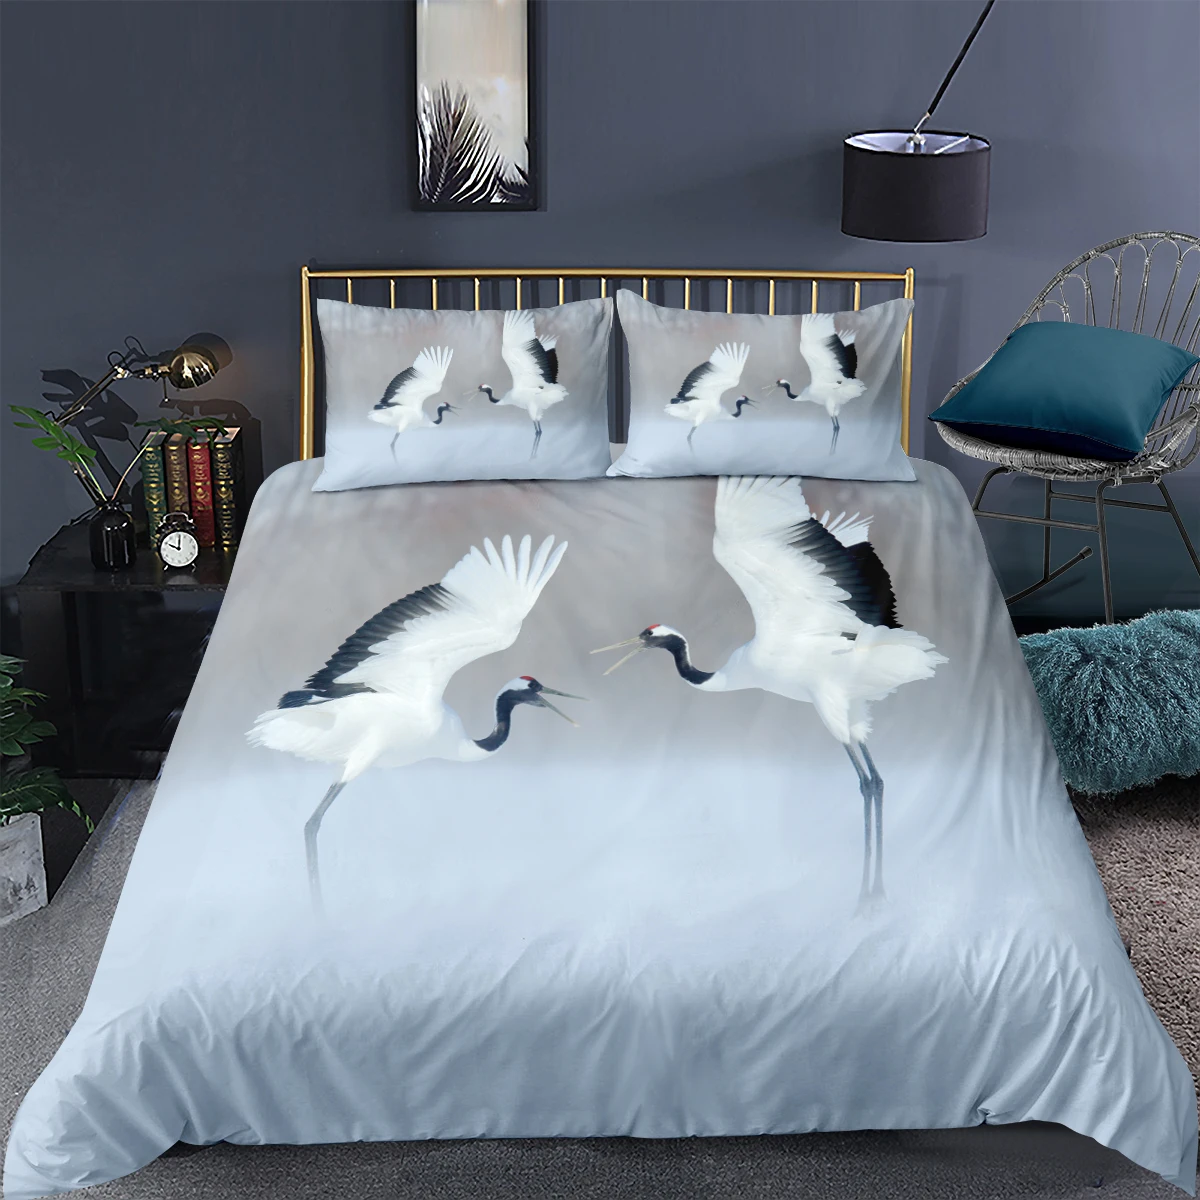 

3D Red-Crowned Crane Printed Bedding Set Quilt Cover Adult Child Pillowcase Soft Bes Sets Luxury Animal Duvet Cover